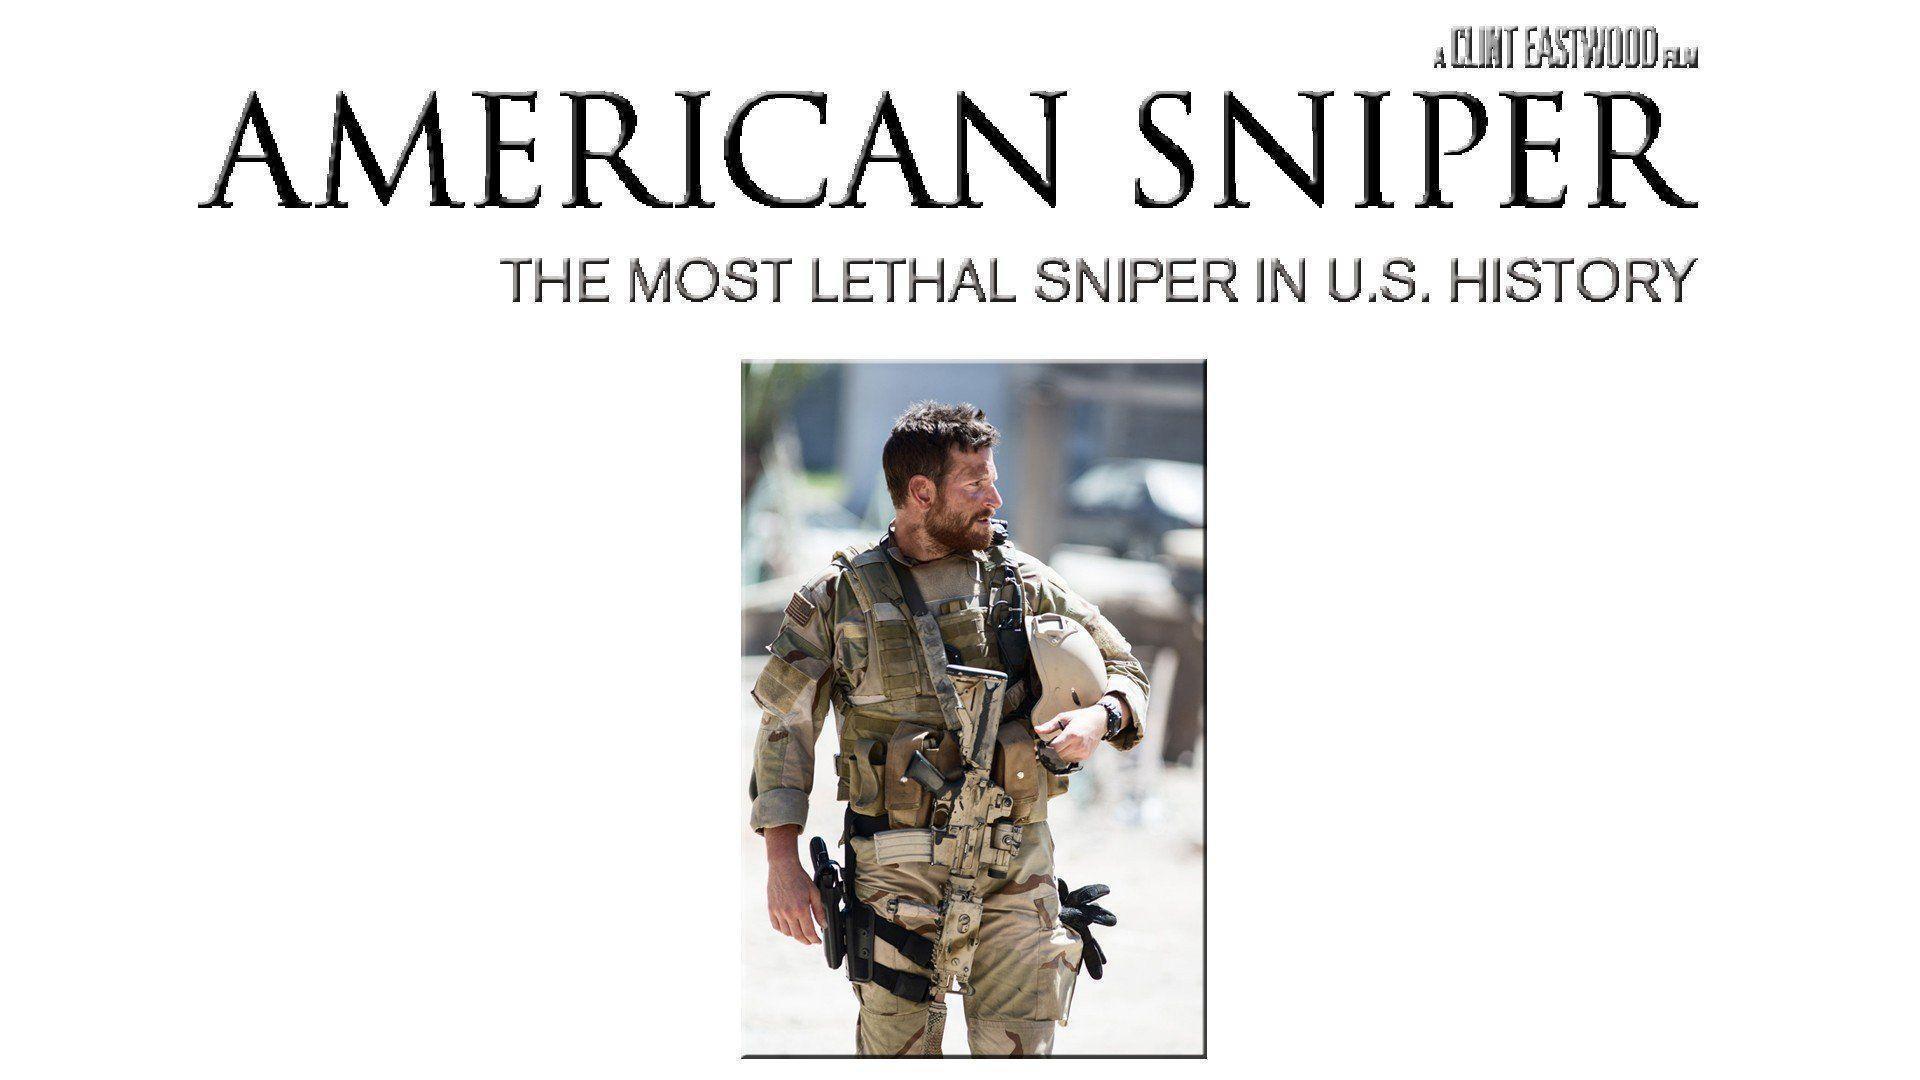 AMERICAN SNIPER biography military war fighting navy seal action